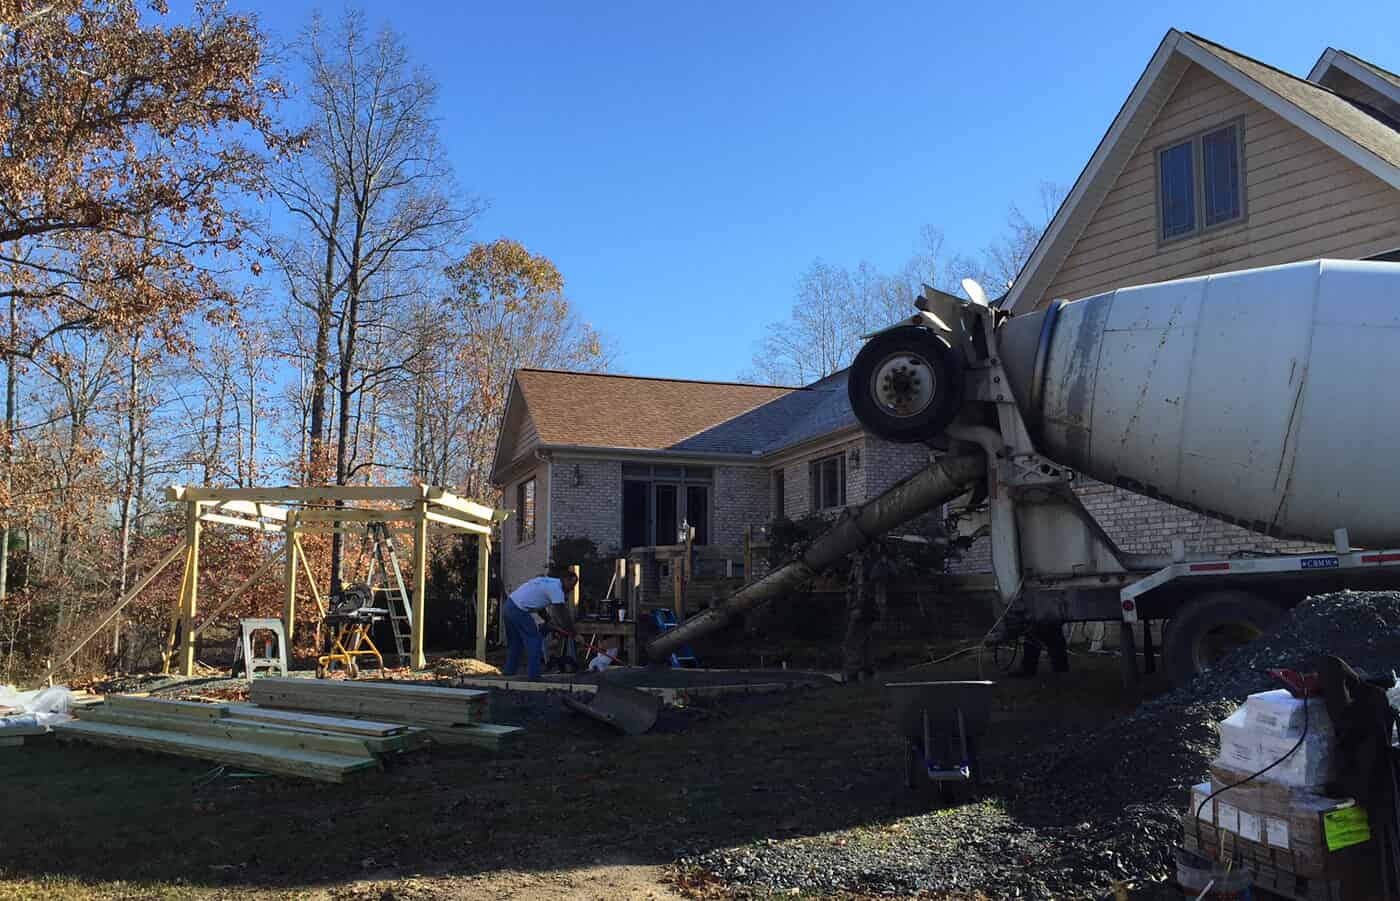 cement truck in front of house with gazebo under construction